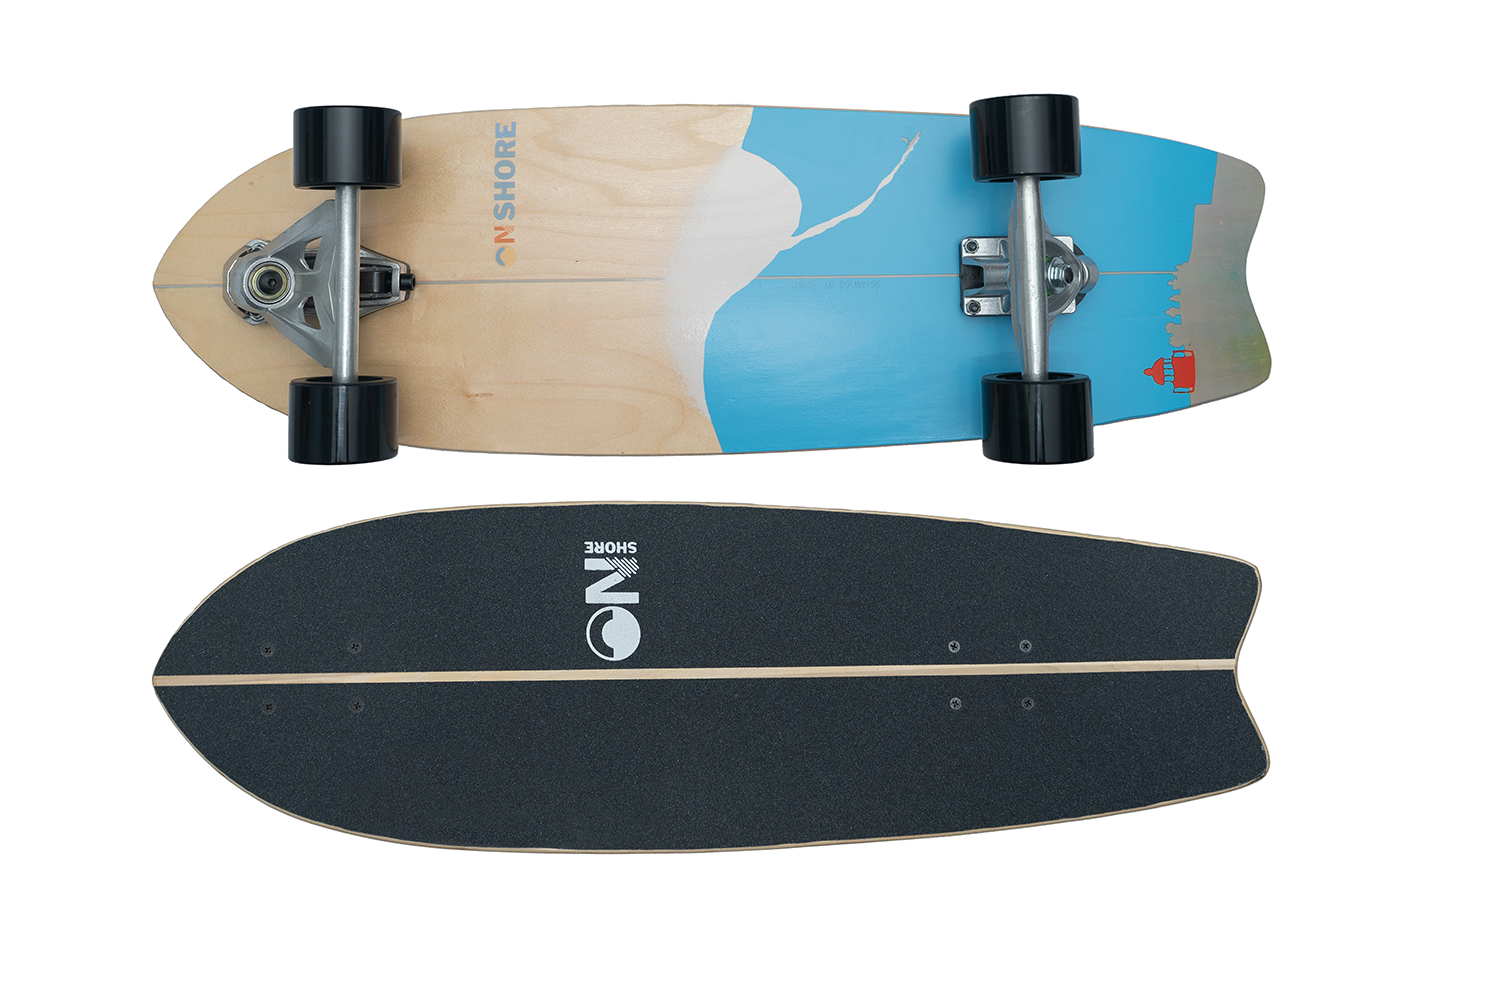 NZ Canyon model surfskate